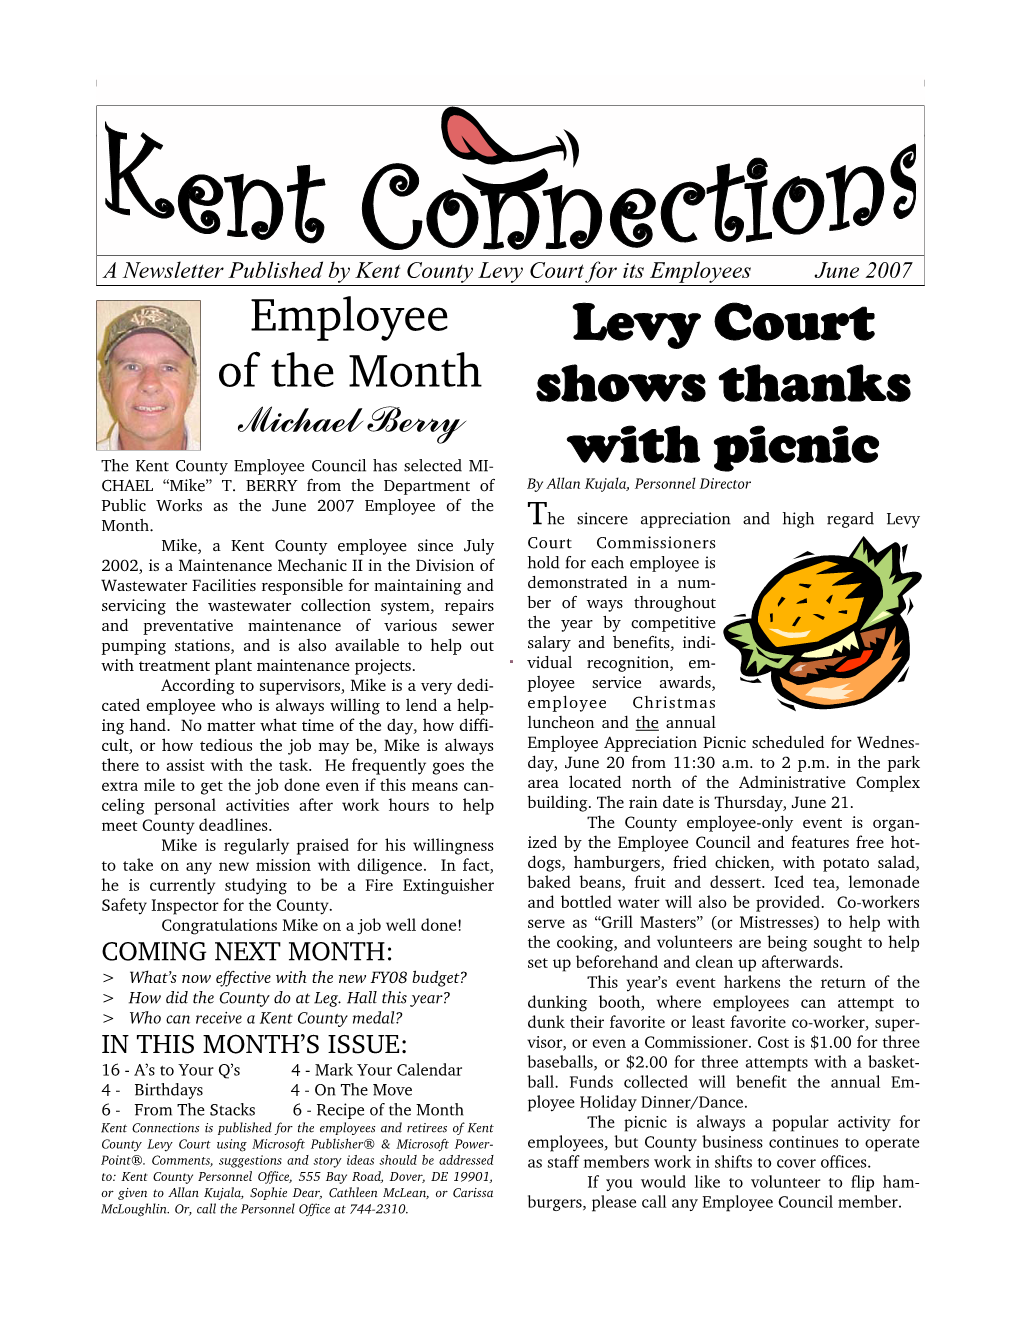 Levy Court Shows Thanks with Picnic